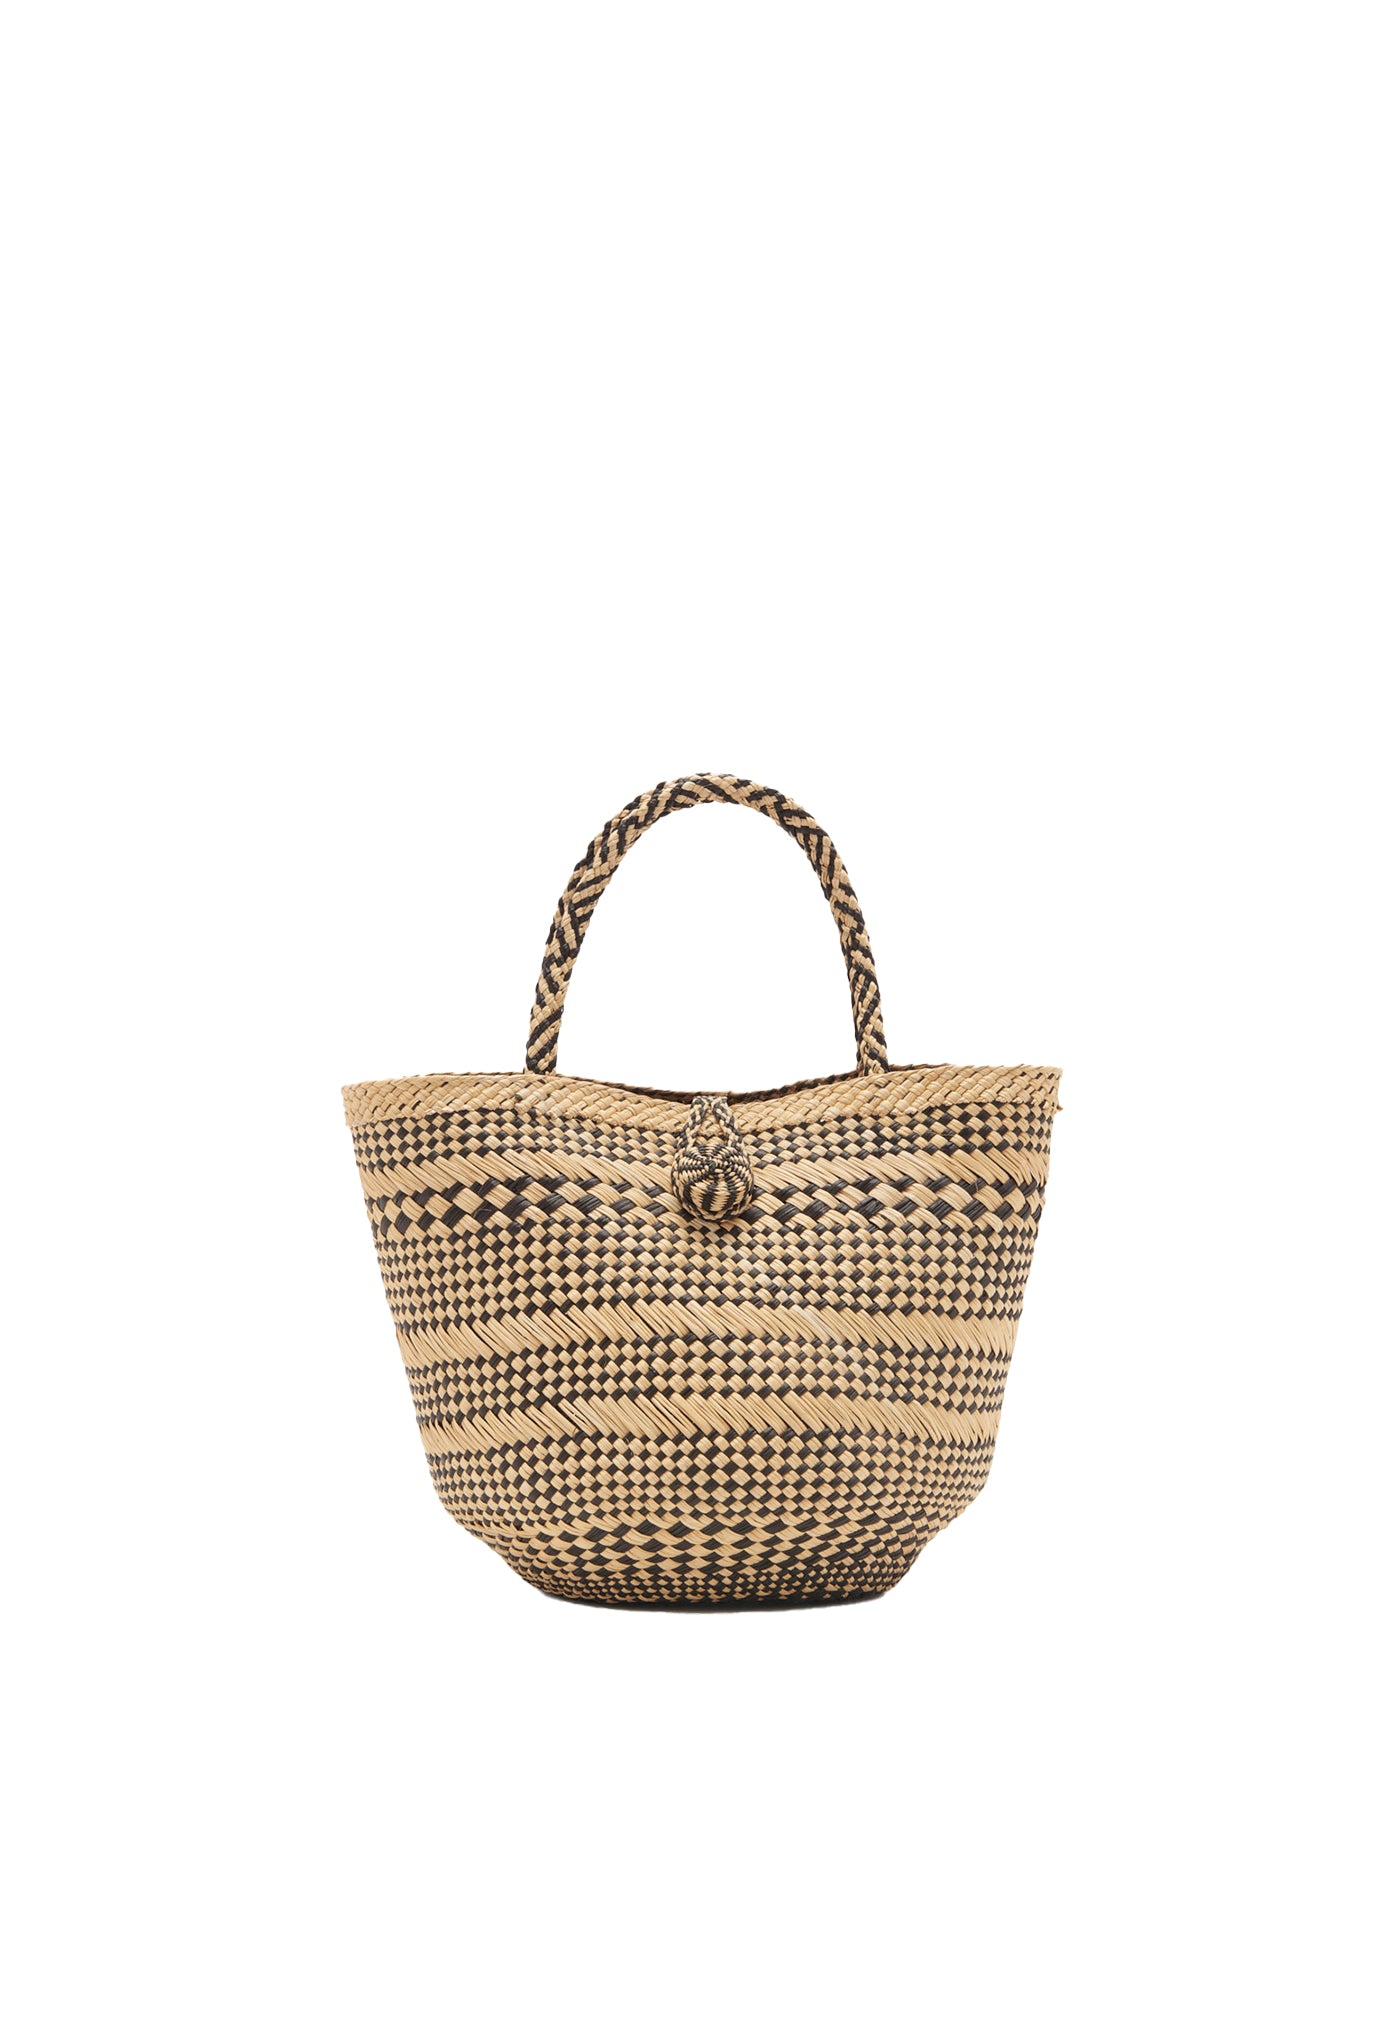 Marta Small Basket Tote - Chocolate Stripe sold by Angel Divine